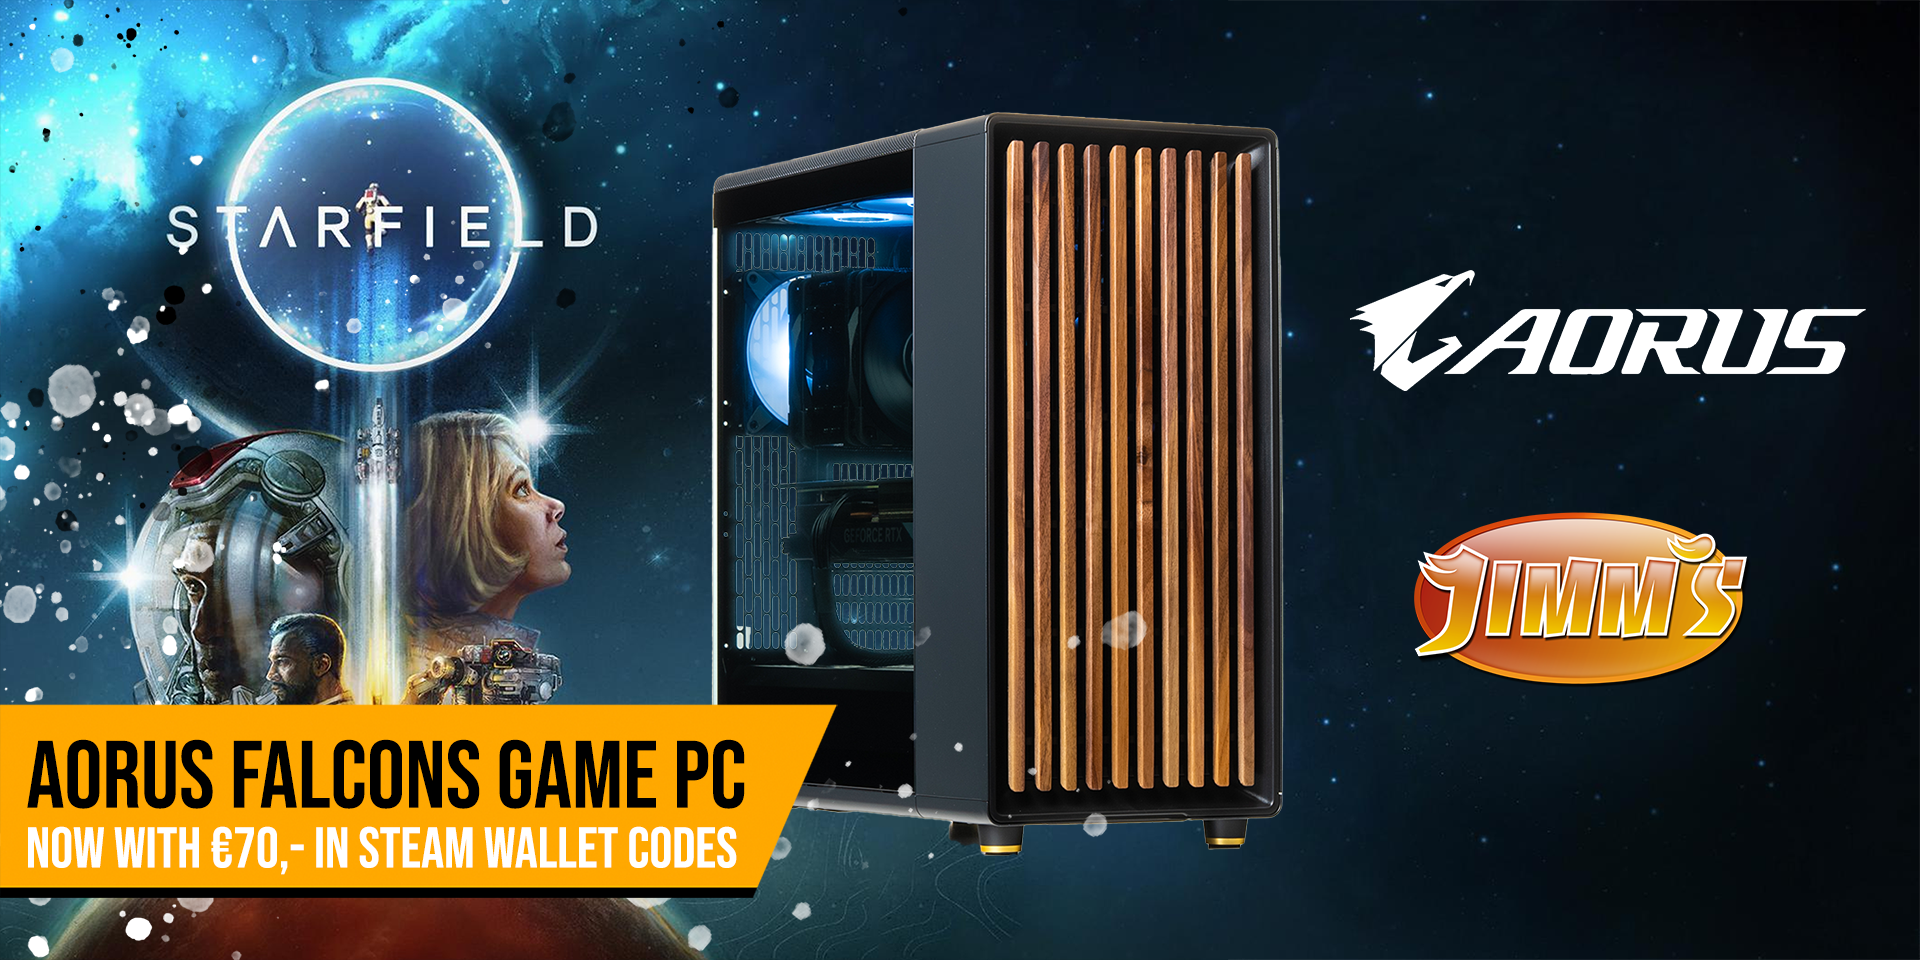 AORUS Falcons assemble! Get Starfield for free with your new AORUS Falcon PC from Jimm's PC Store